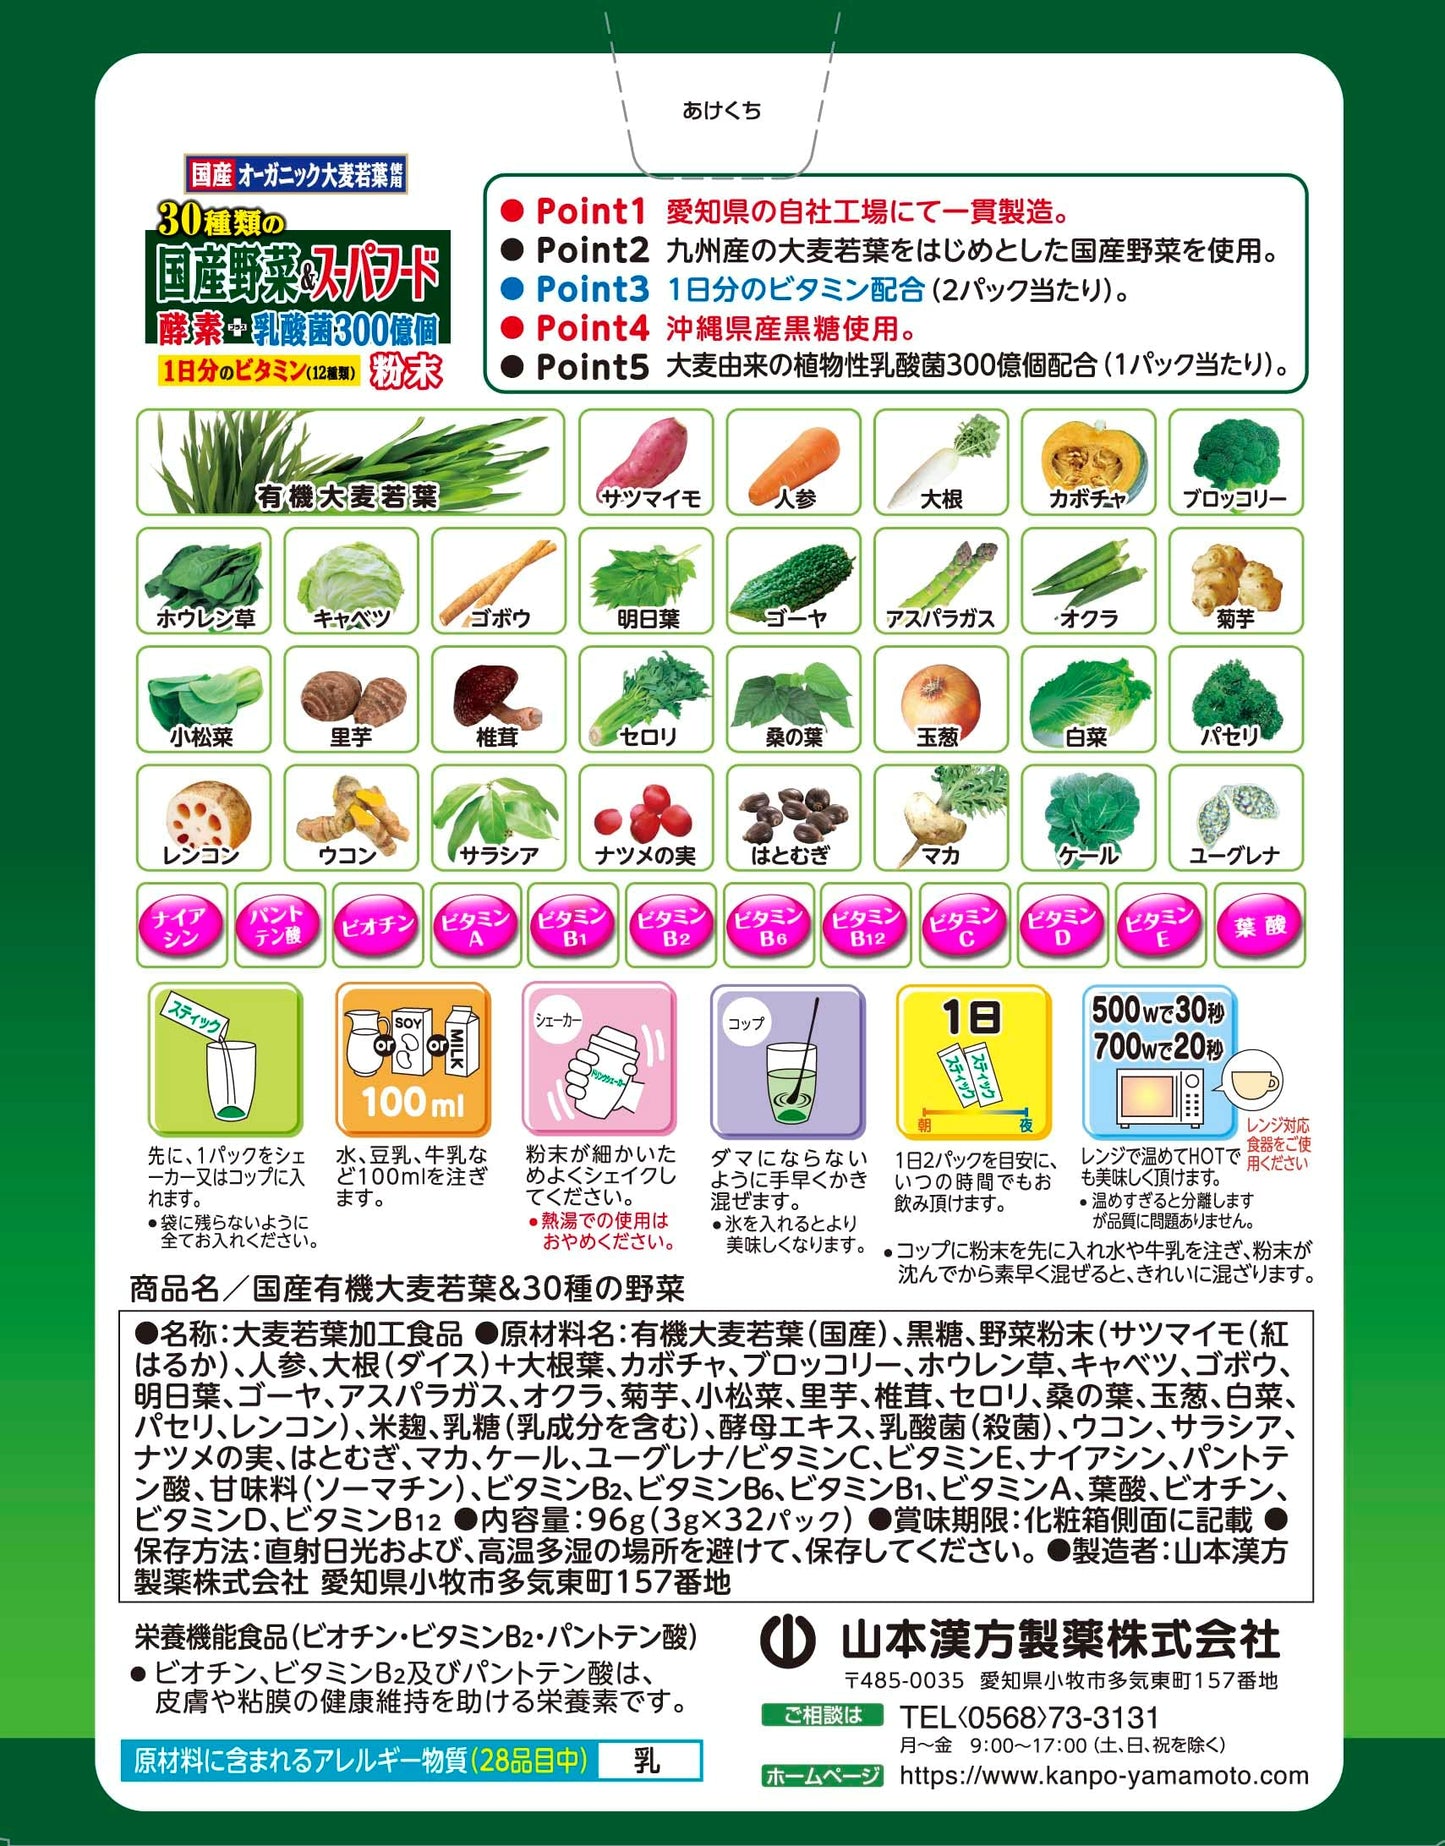 Yamamoto Kampo Pharmaceutical Green Juice 30 types of domestic vegetables + superfood 3g x 30 packets / 3g x 64 packets